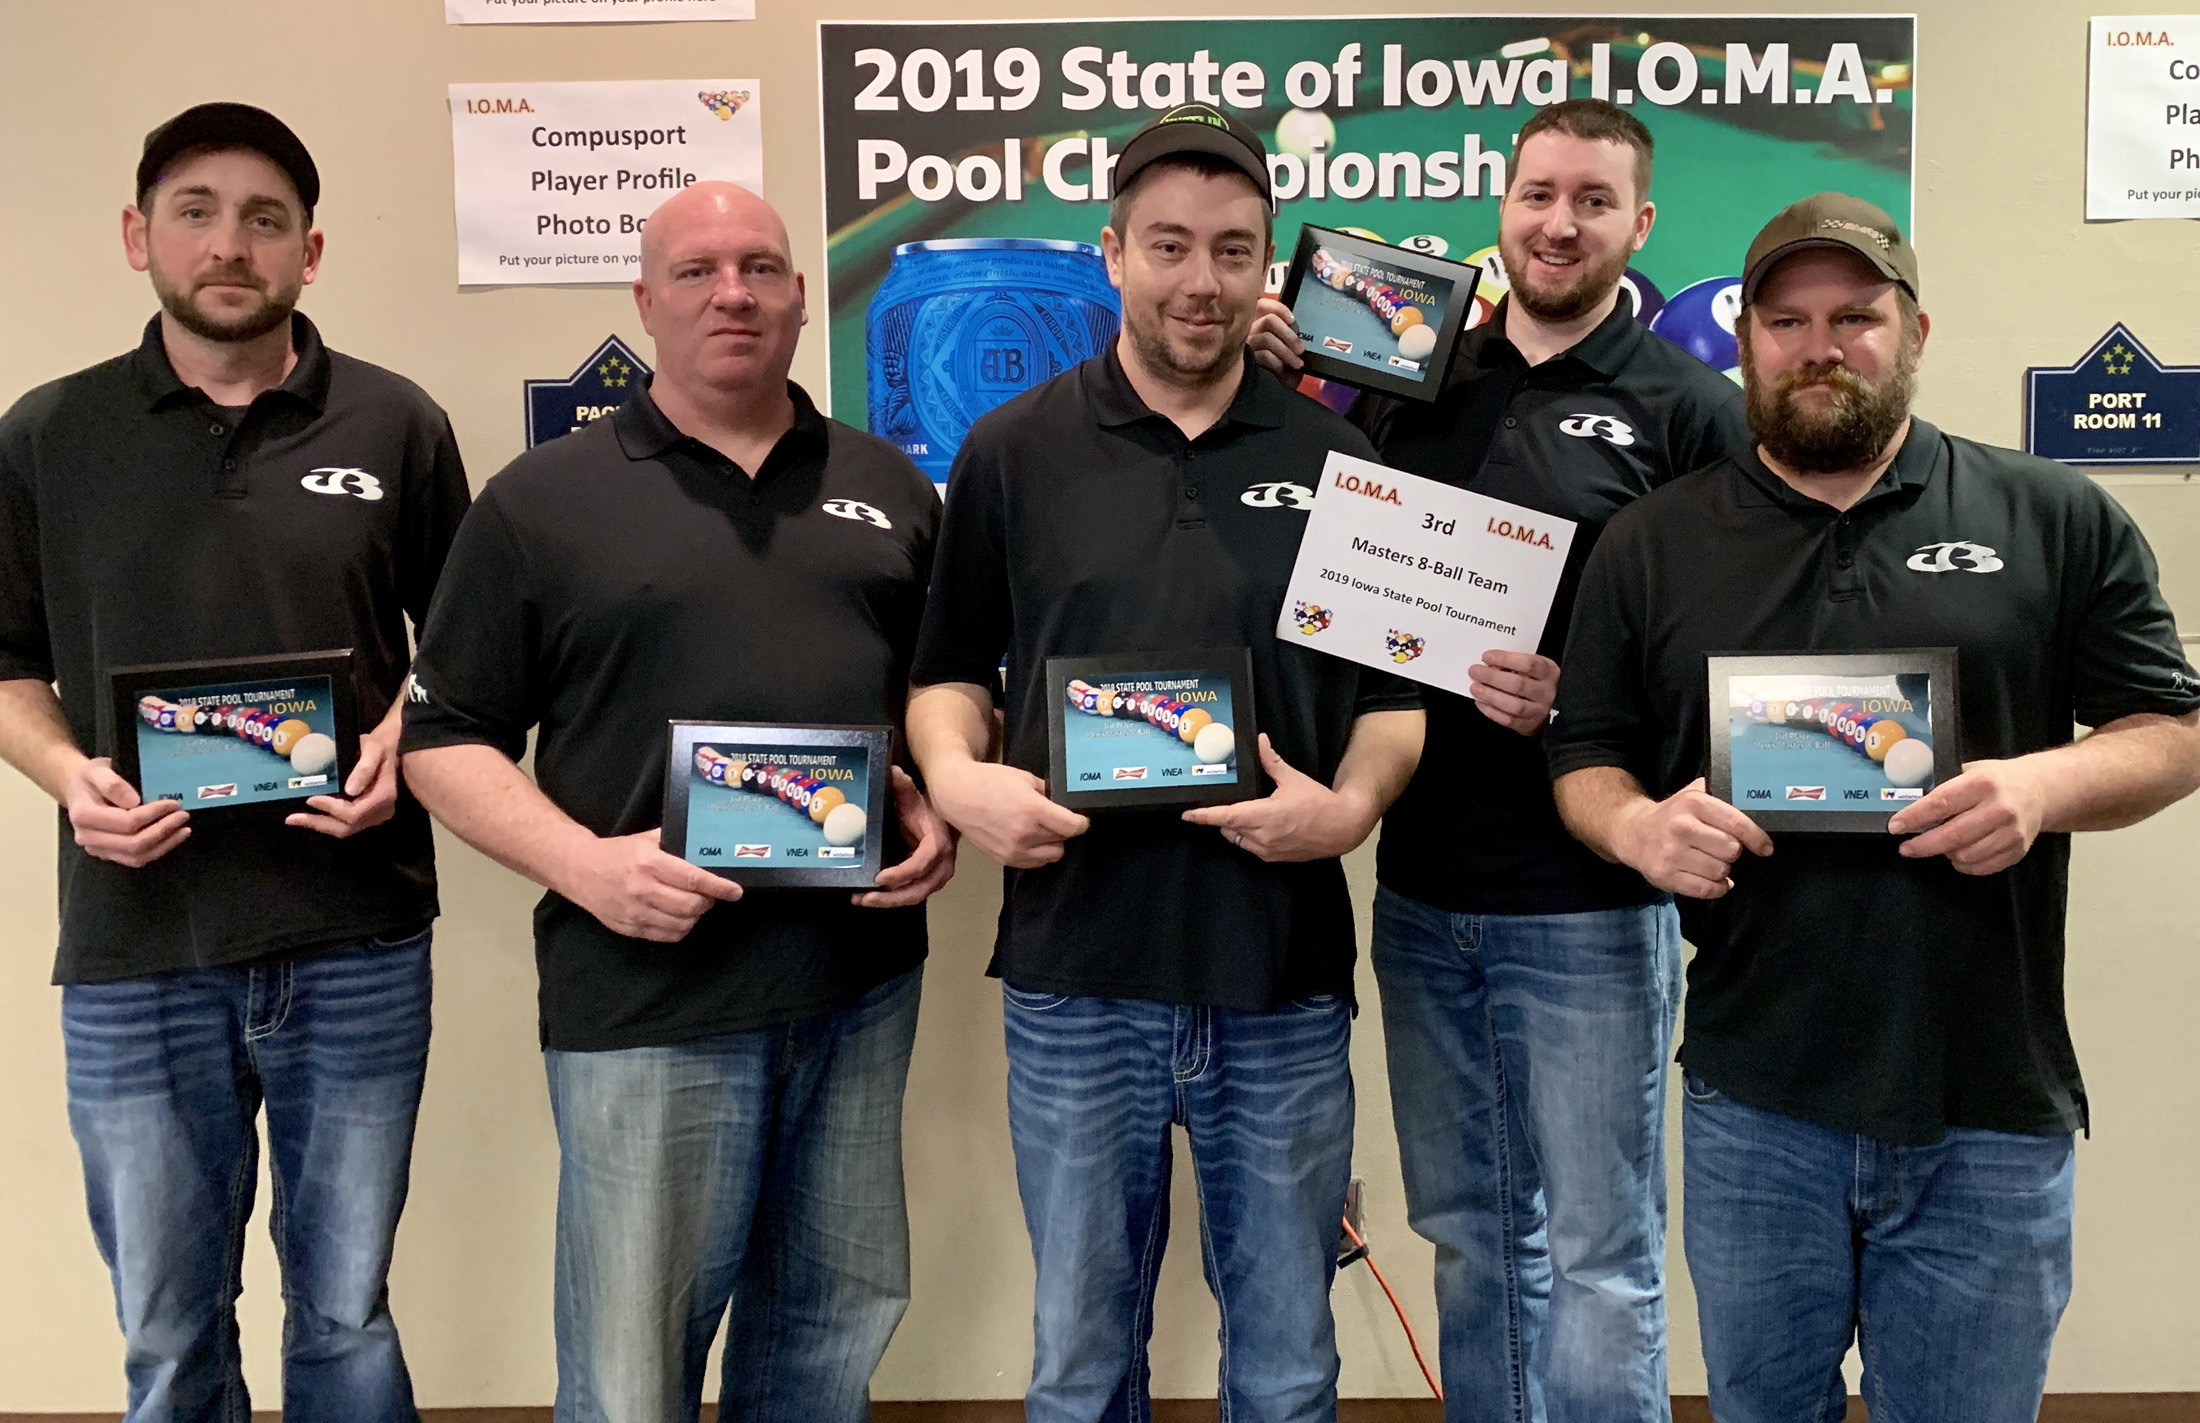 Hots Shots takes 3rd in Masters 8-Ball Team division at State Pool Championships